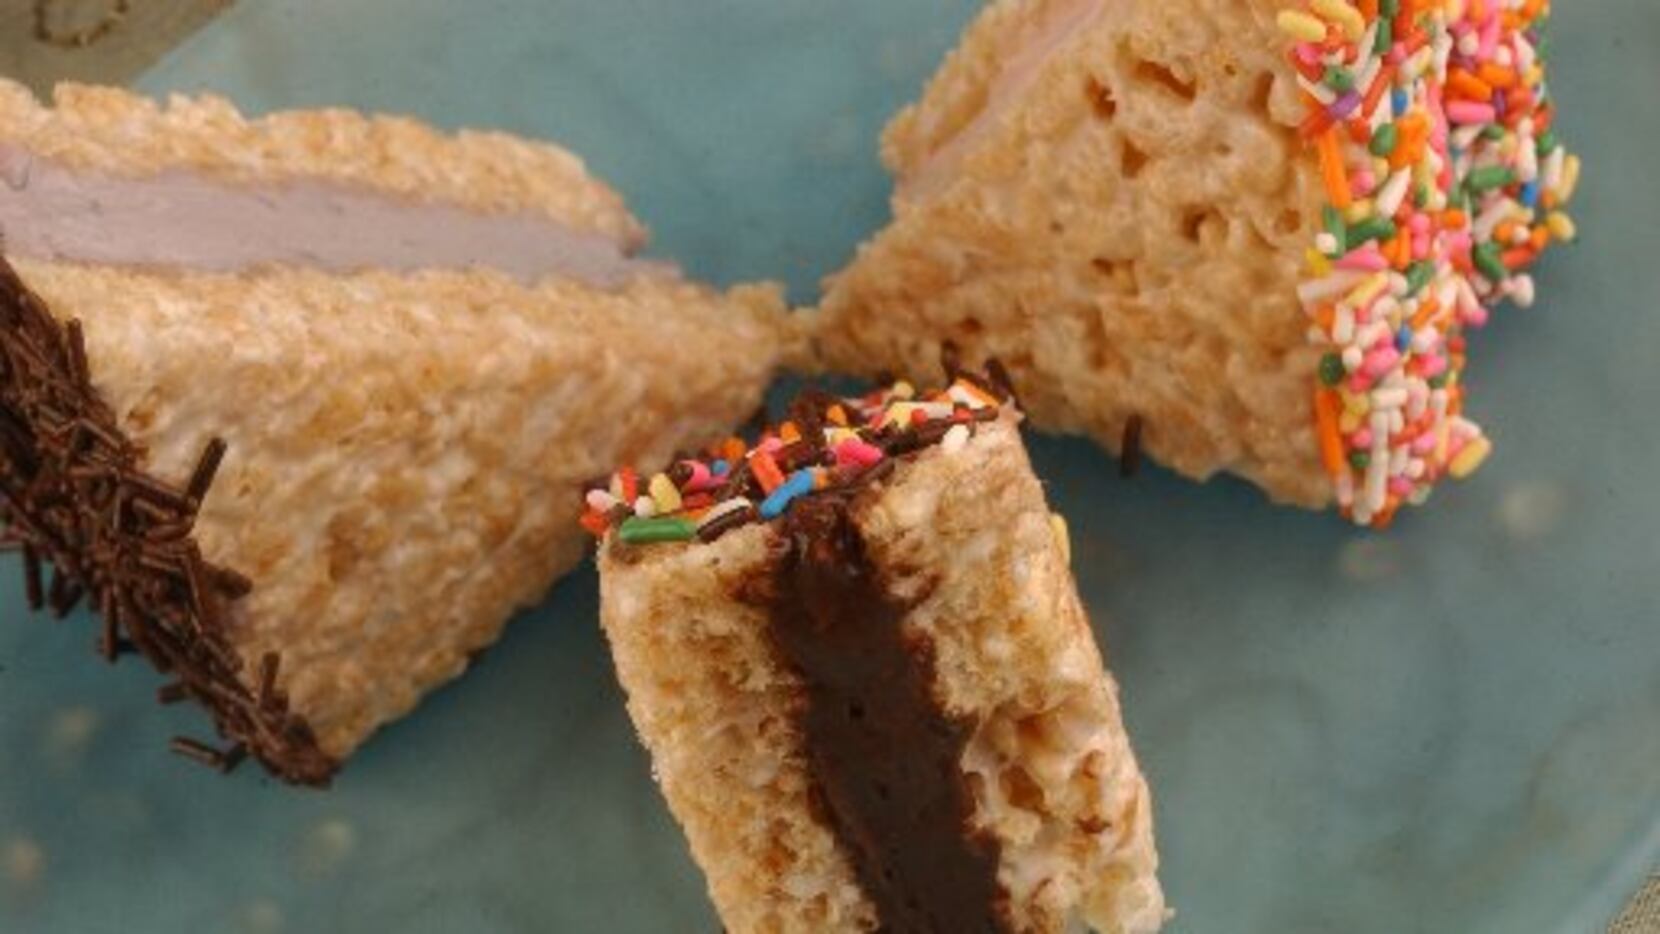 Rice Krispies sandwiches, from a 2003 file photo.